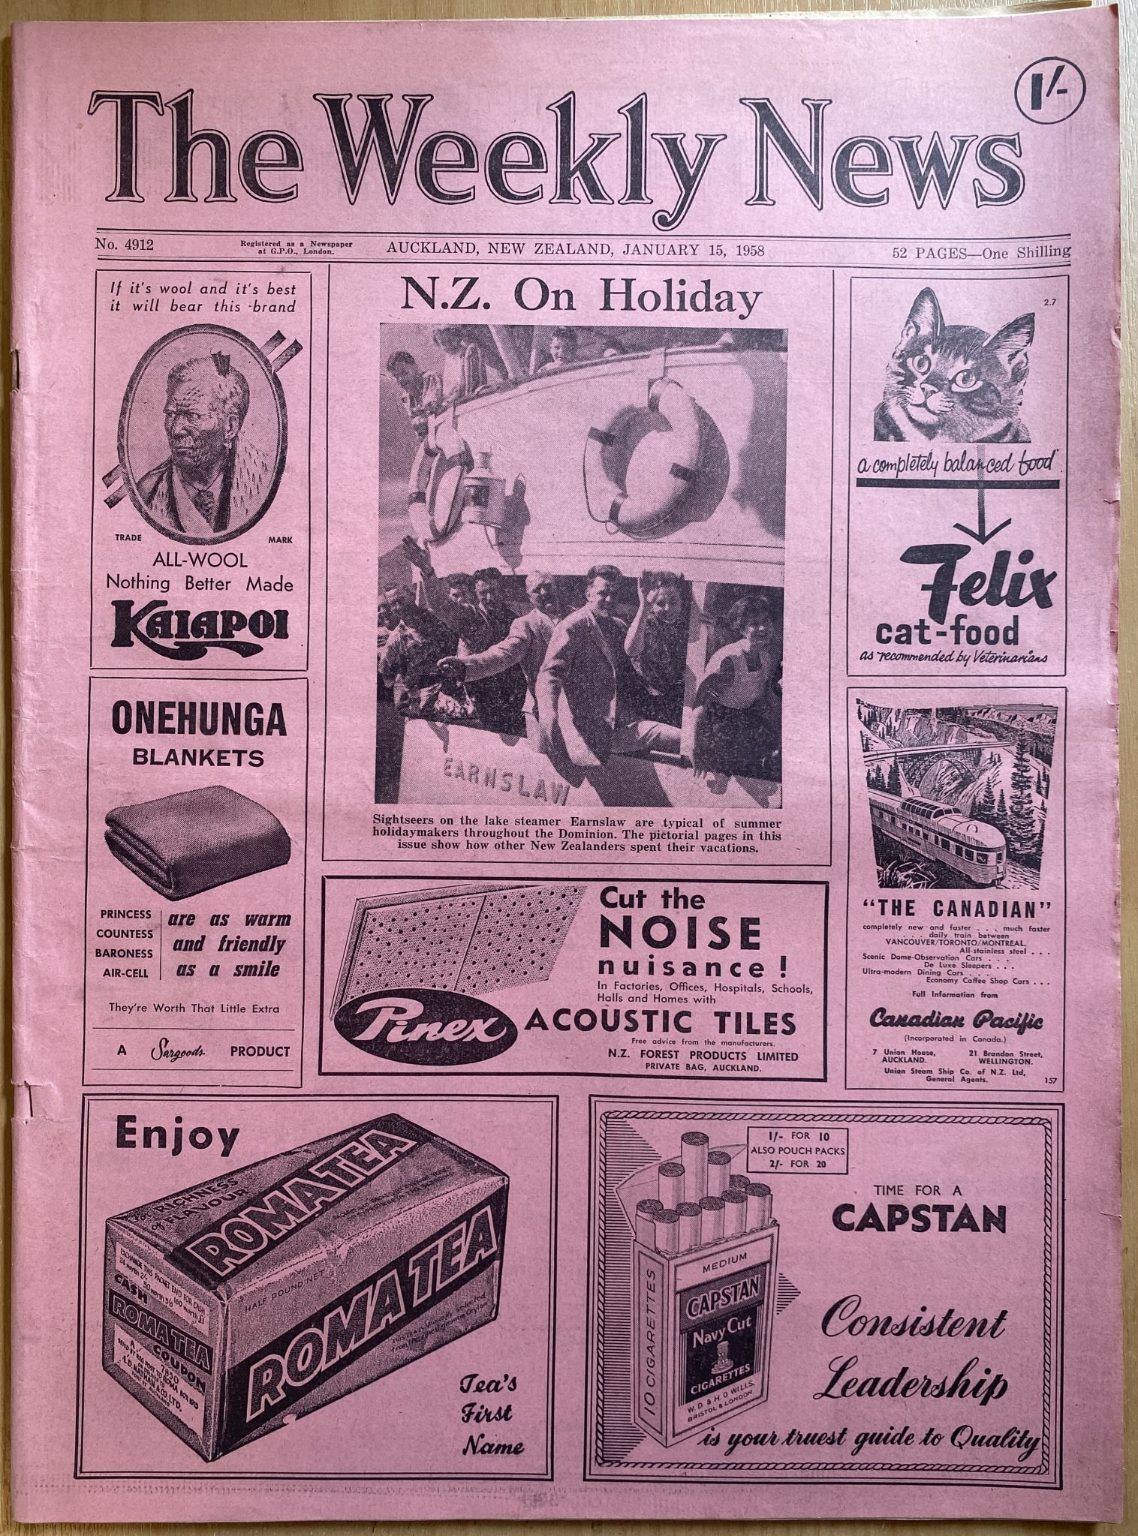 OLD NEWSPAPER: The Weekly News, No. 4912, 15 January 1958